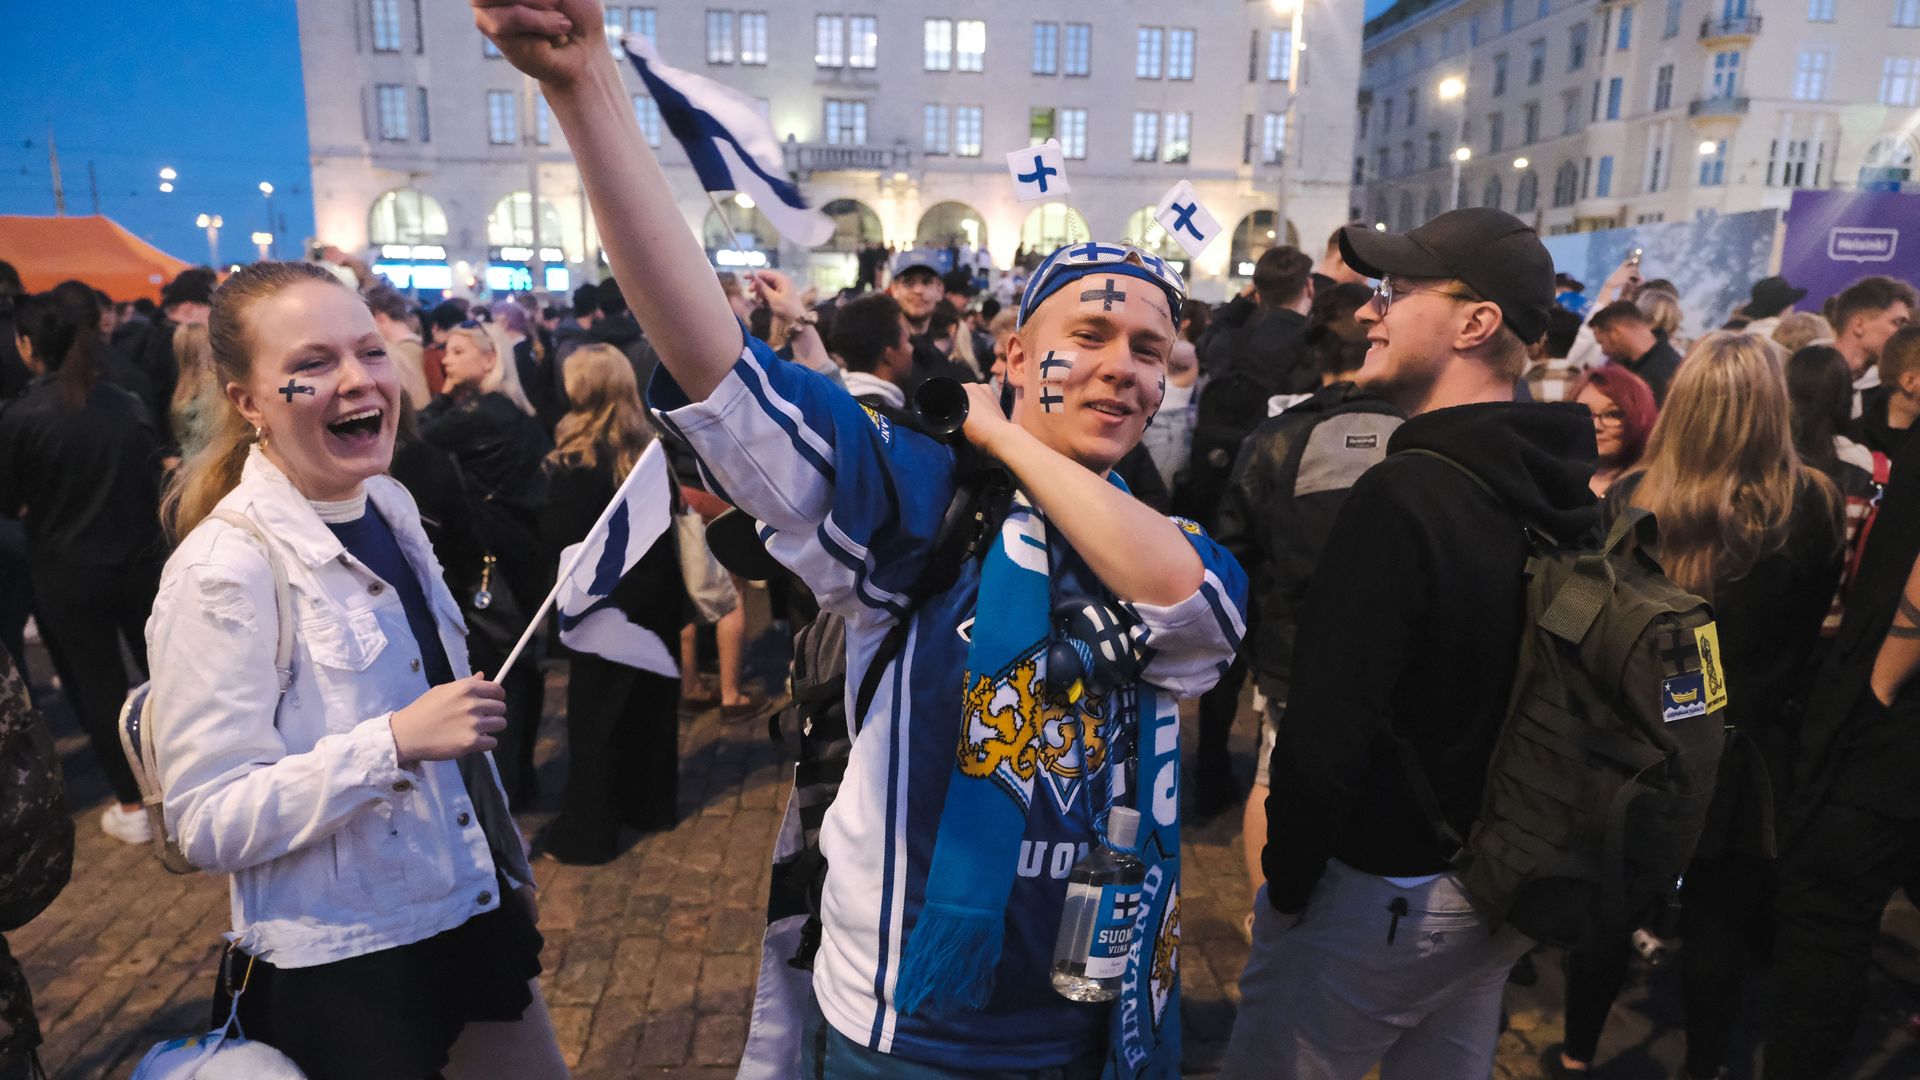 Ice hockey fans and revellers crowd the Kauppatori square in Helsinki on May 29.